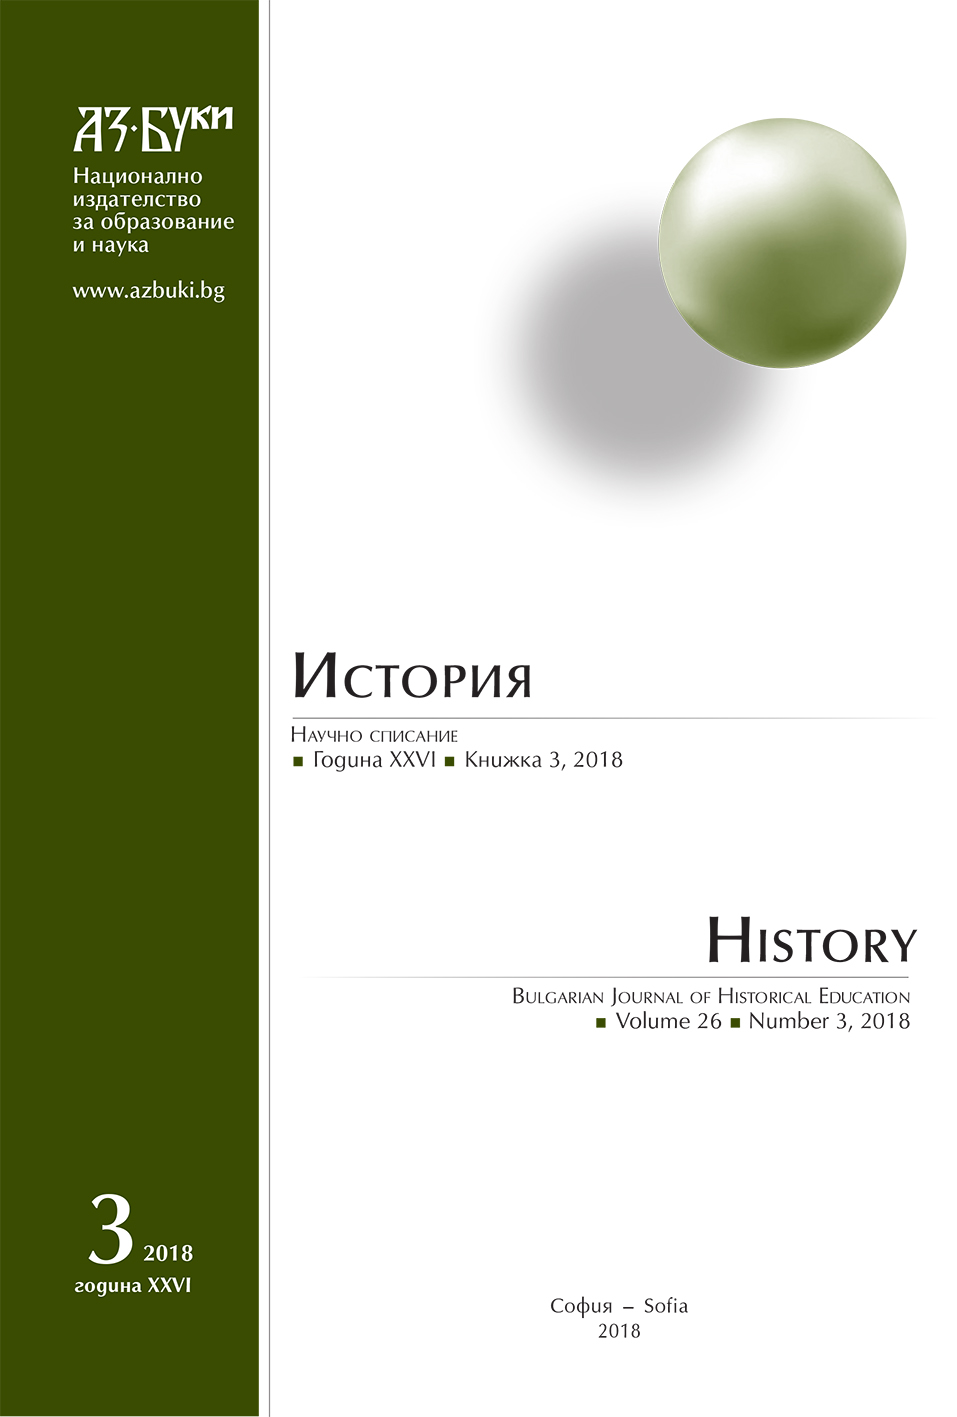 Archaeological Reserves and Archaeological Museums in situ in Bulgaria. Appearance and Historical Development Cover Image